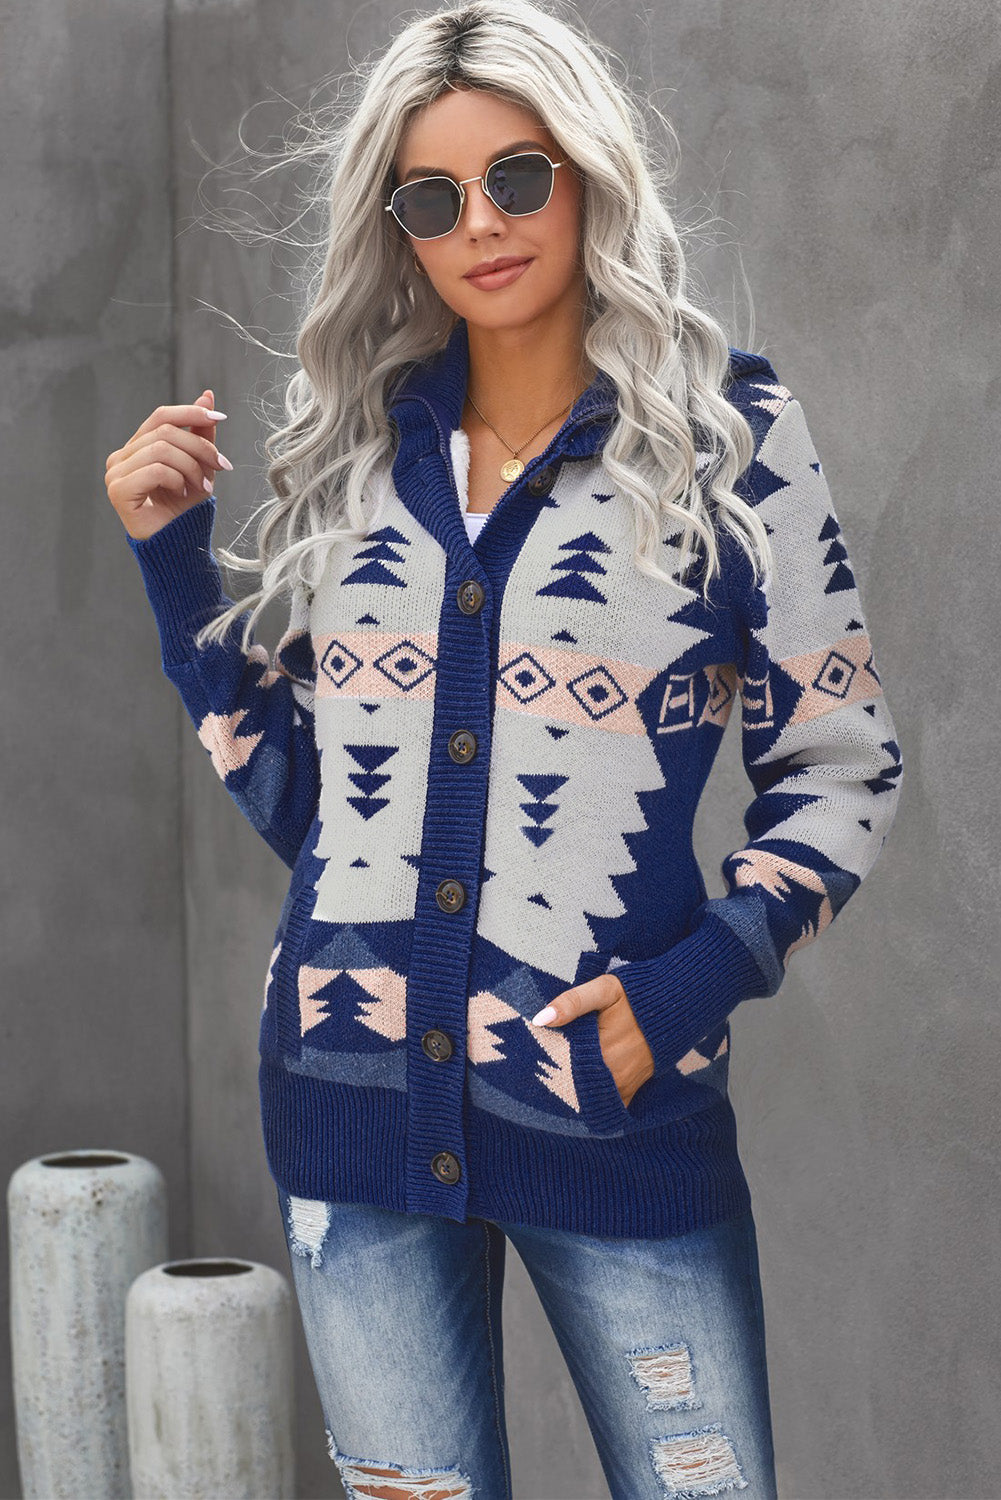 Women Jacquard Knit Cardigans Buttoned Front Hooded Sweater